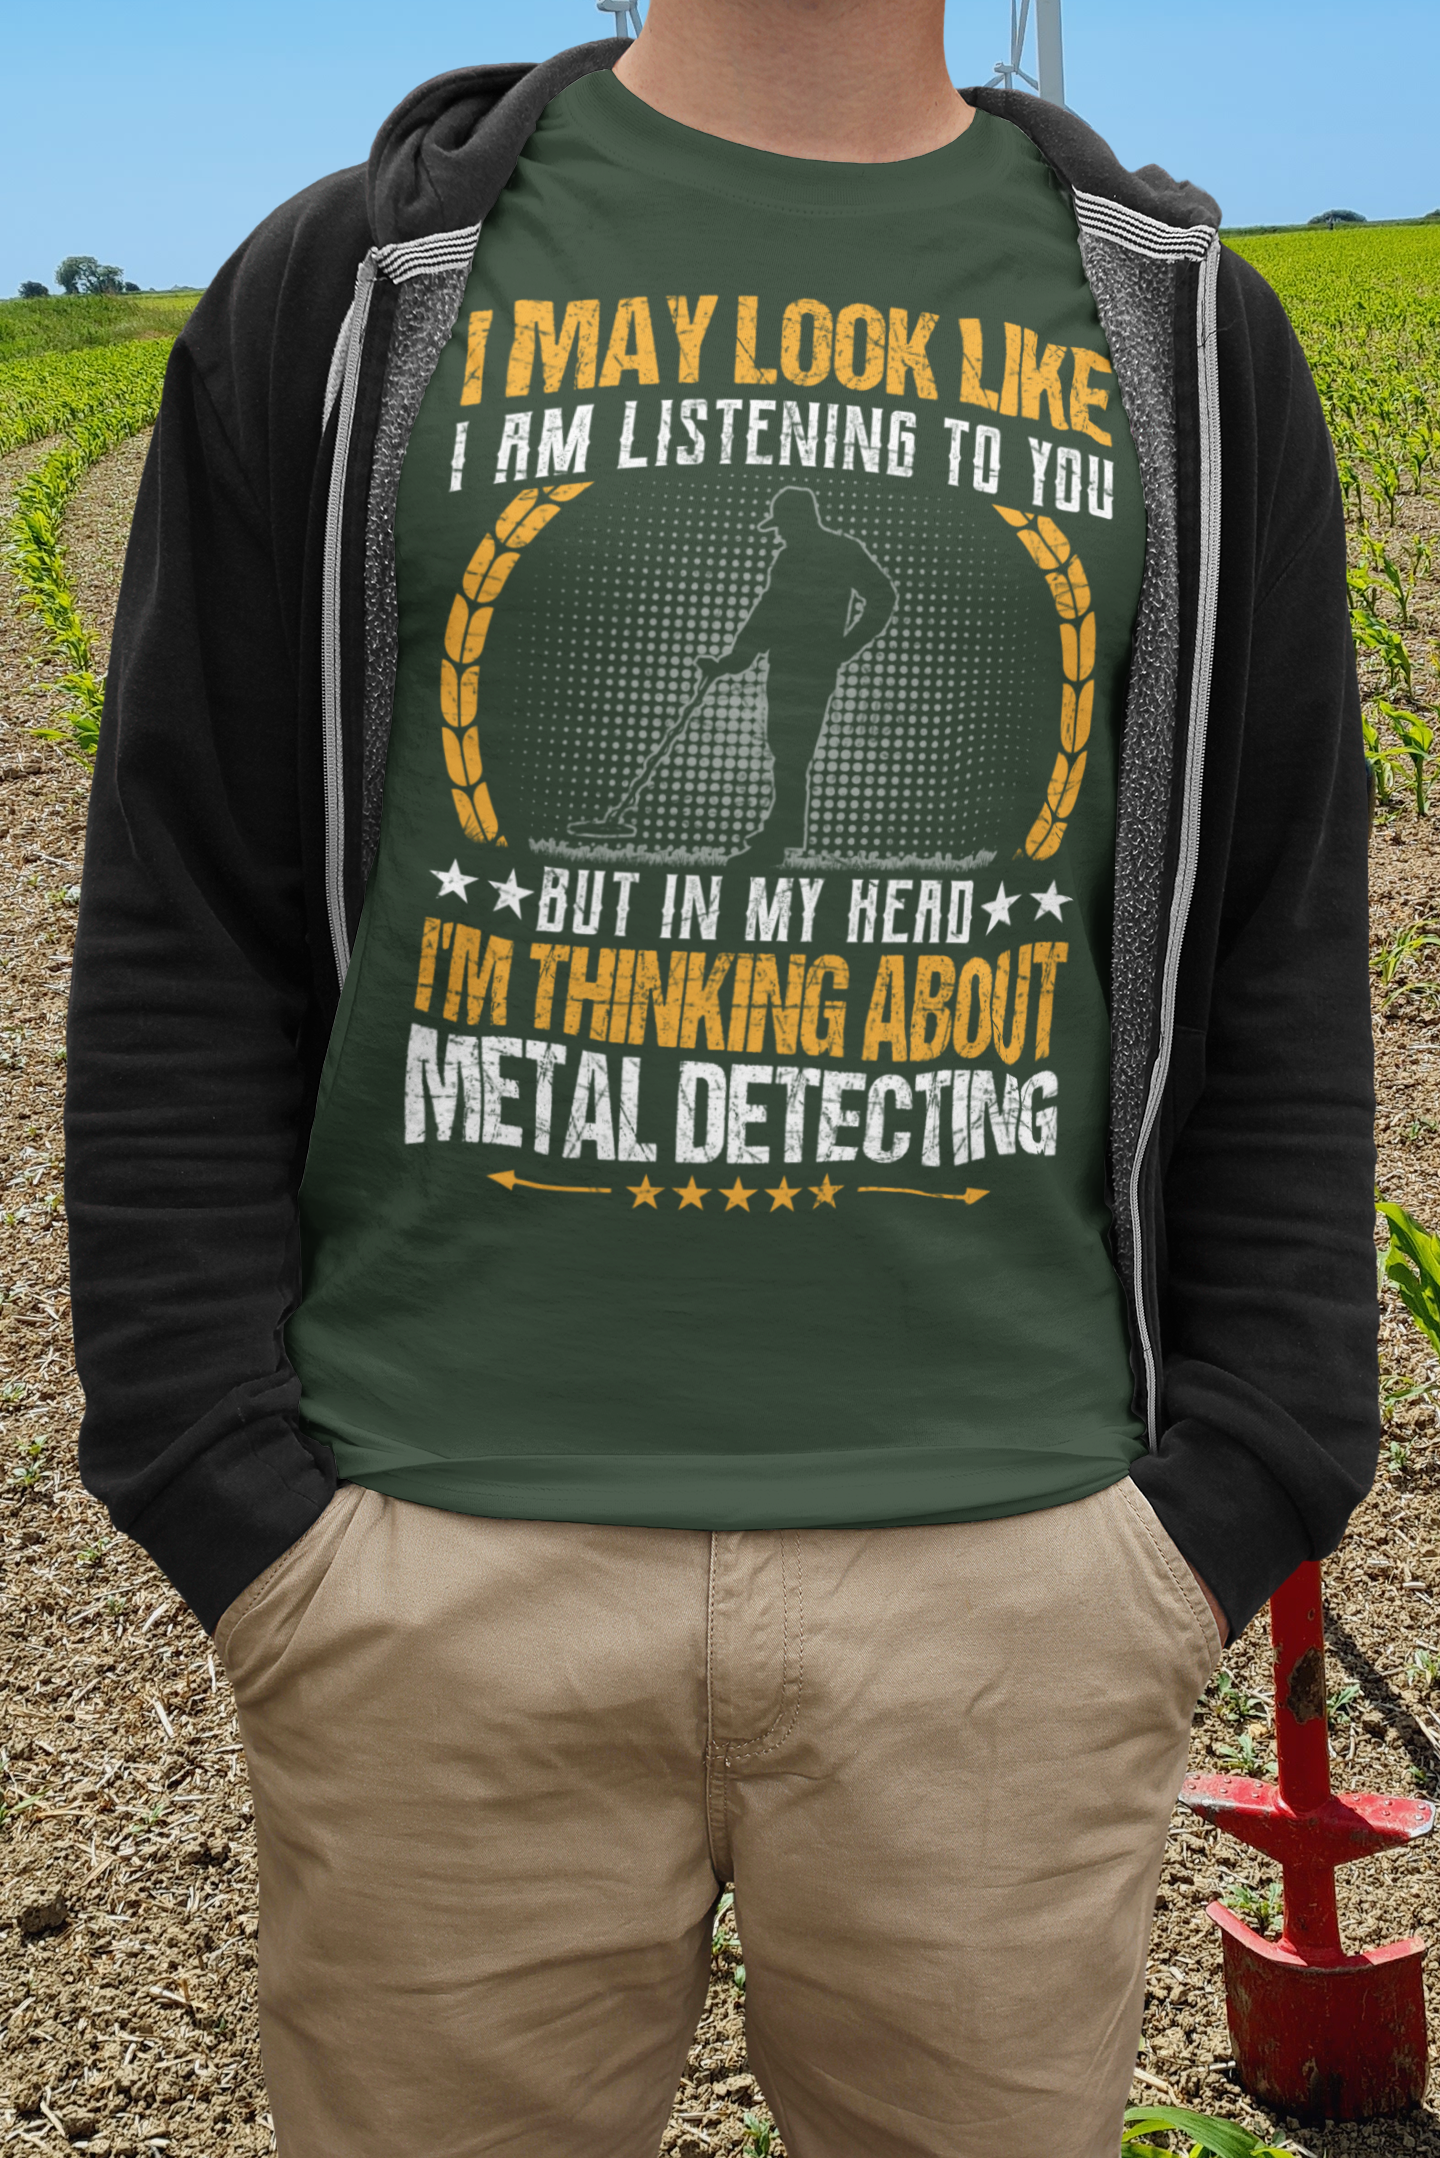 I may look like I am listening to you but in my head I'm thinking about metal detecting